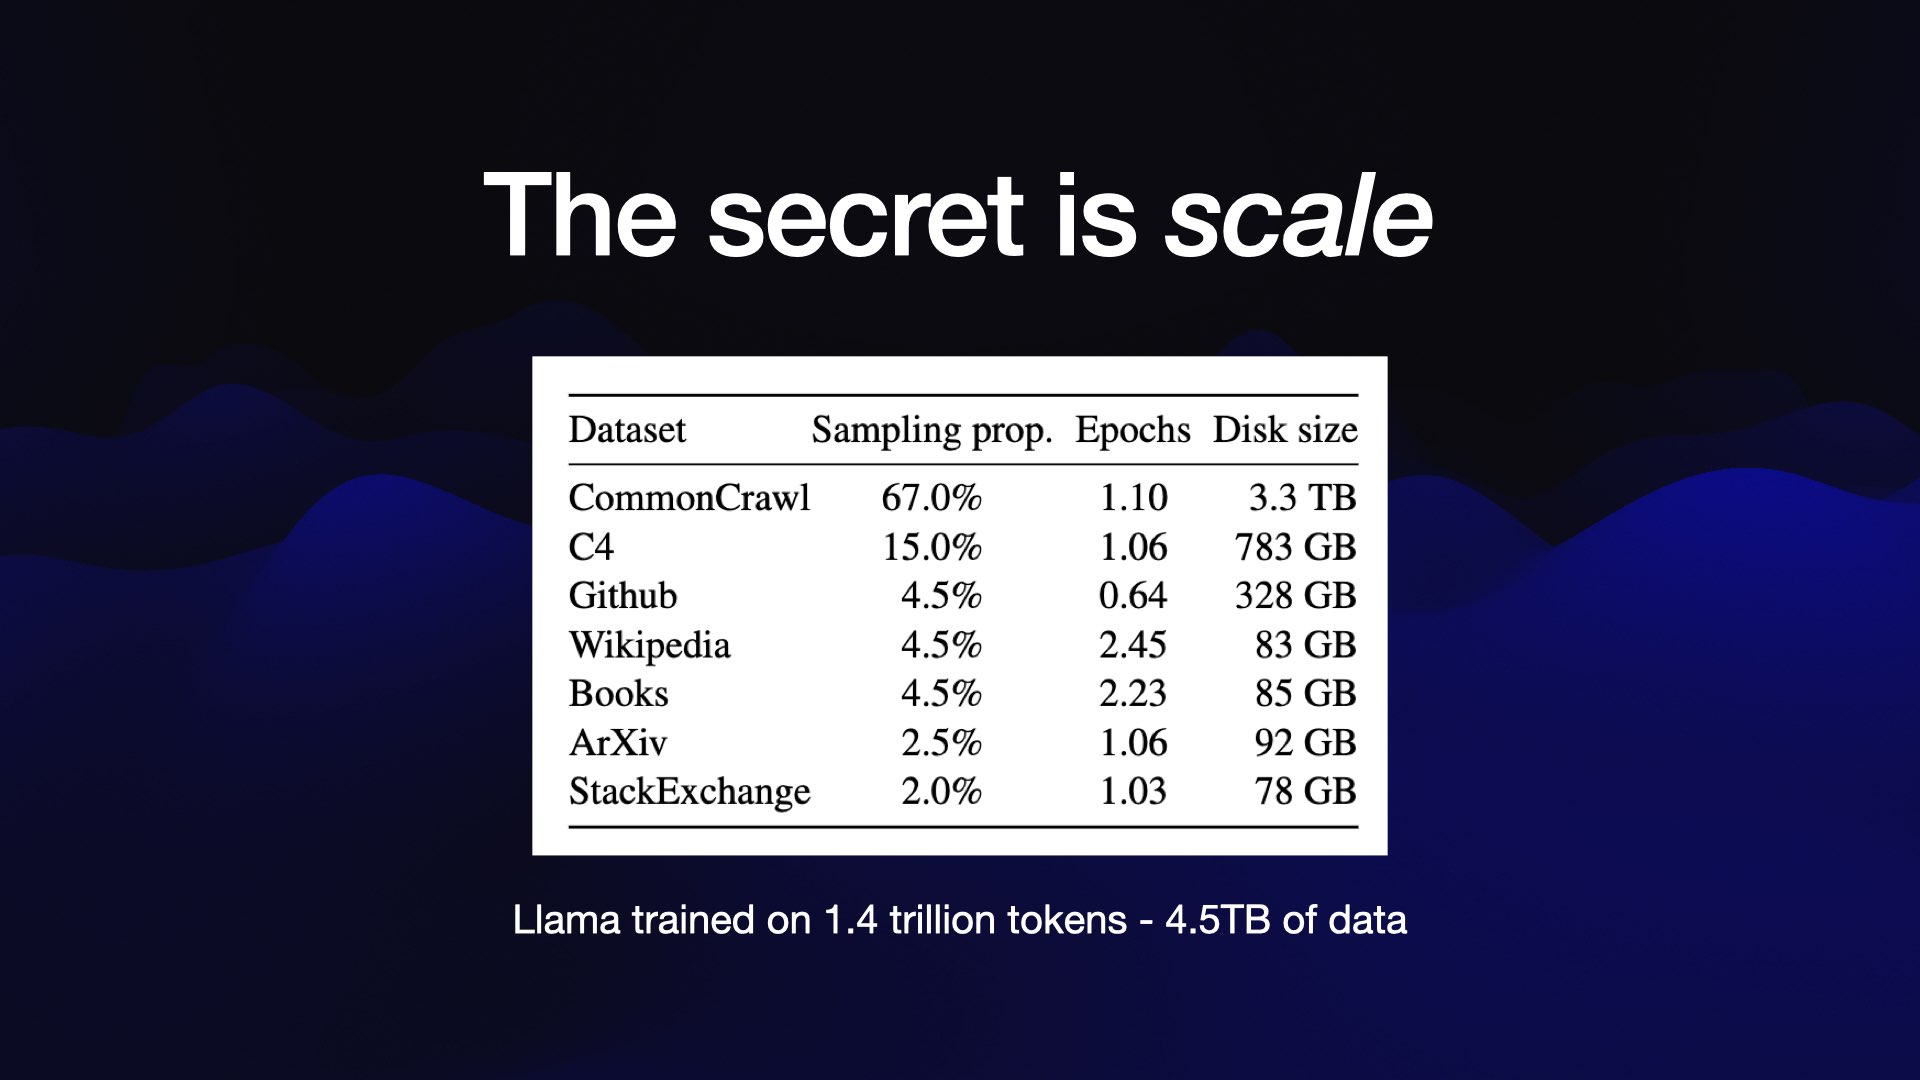 The secret is scale  A table of datasets:  Dataset, Sampling prop, Disk size  CommonCraw  67.0%  33TB Cc4 15.0% 783GB Github 4.5% 328GB Wikipedia 4.5% 83GB Books 4.5% 85GB ArXiv 2.5% 92GB StackExchange 2.0% 78GB  Llama trained on 1.4 trillion tokens - 4.5TB of data